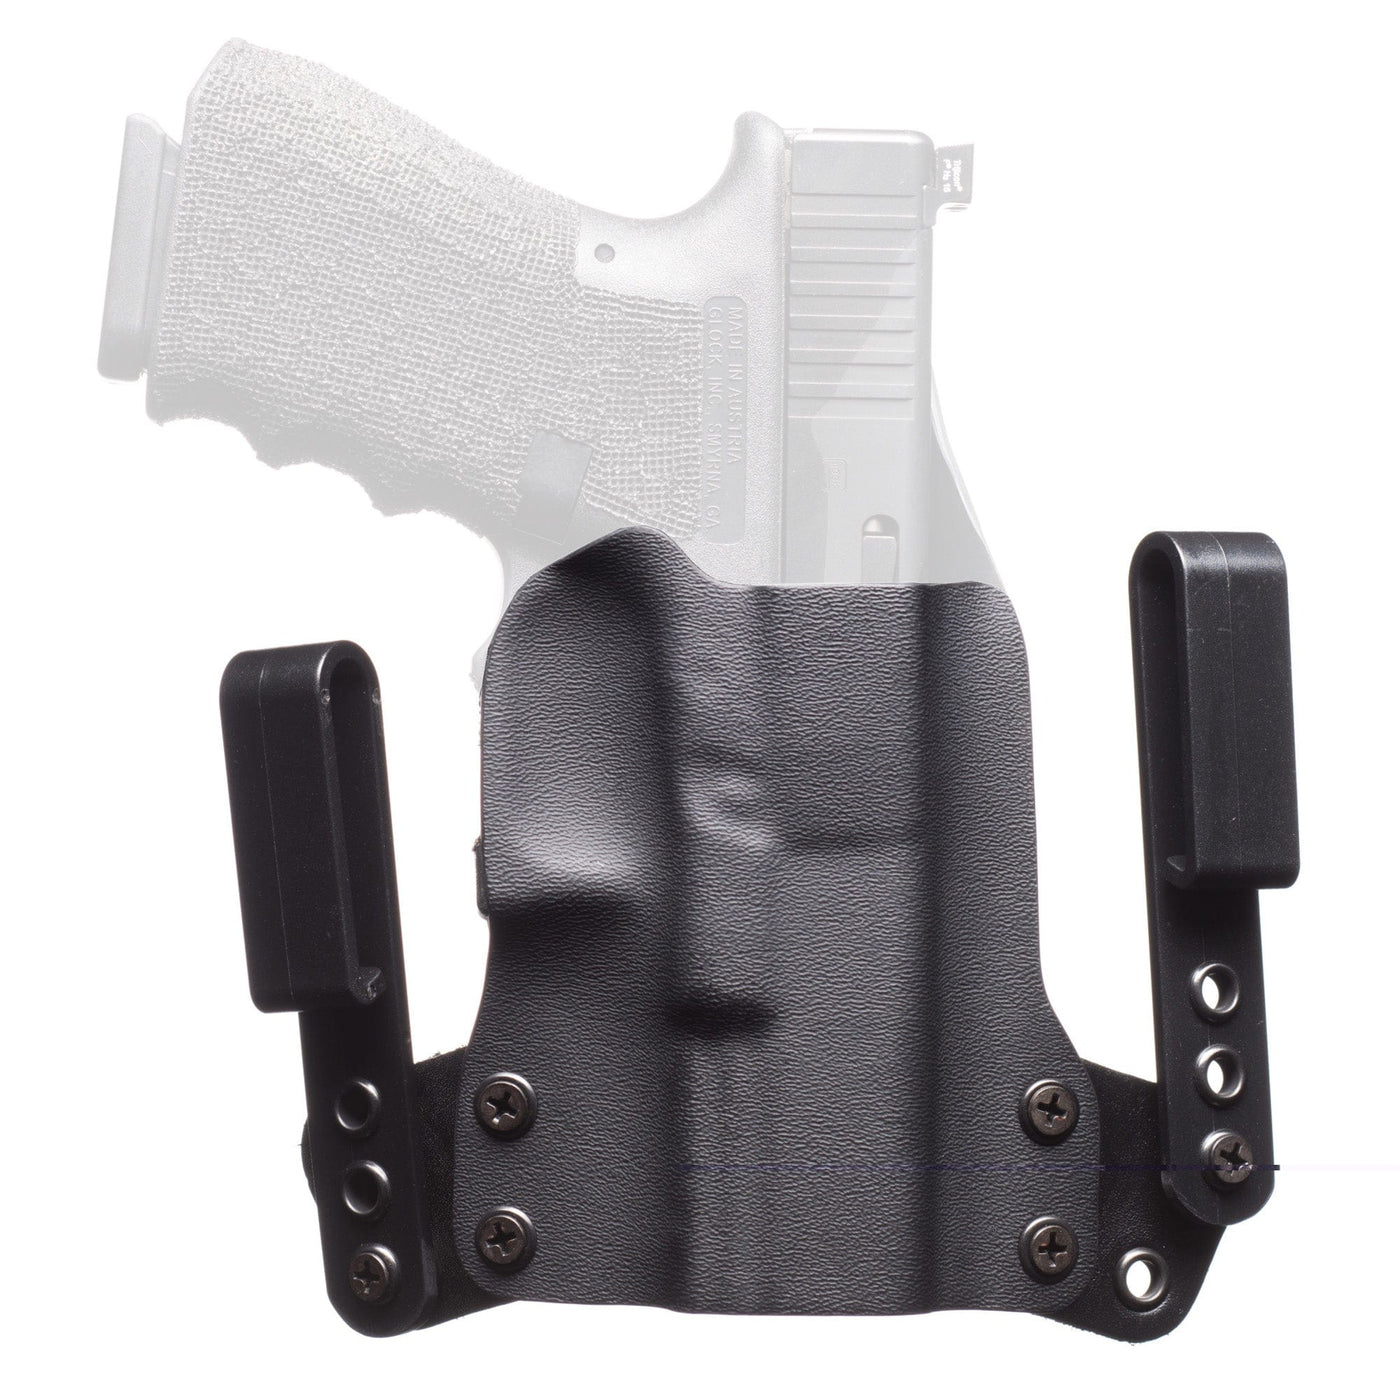 BlackPoint Tactical Blk Pnt Mini Wing Fn509 Tac Rh Blk Holsters